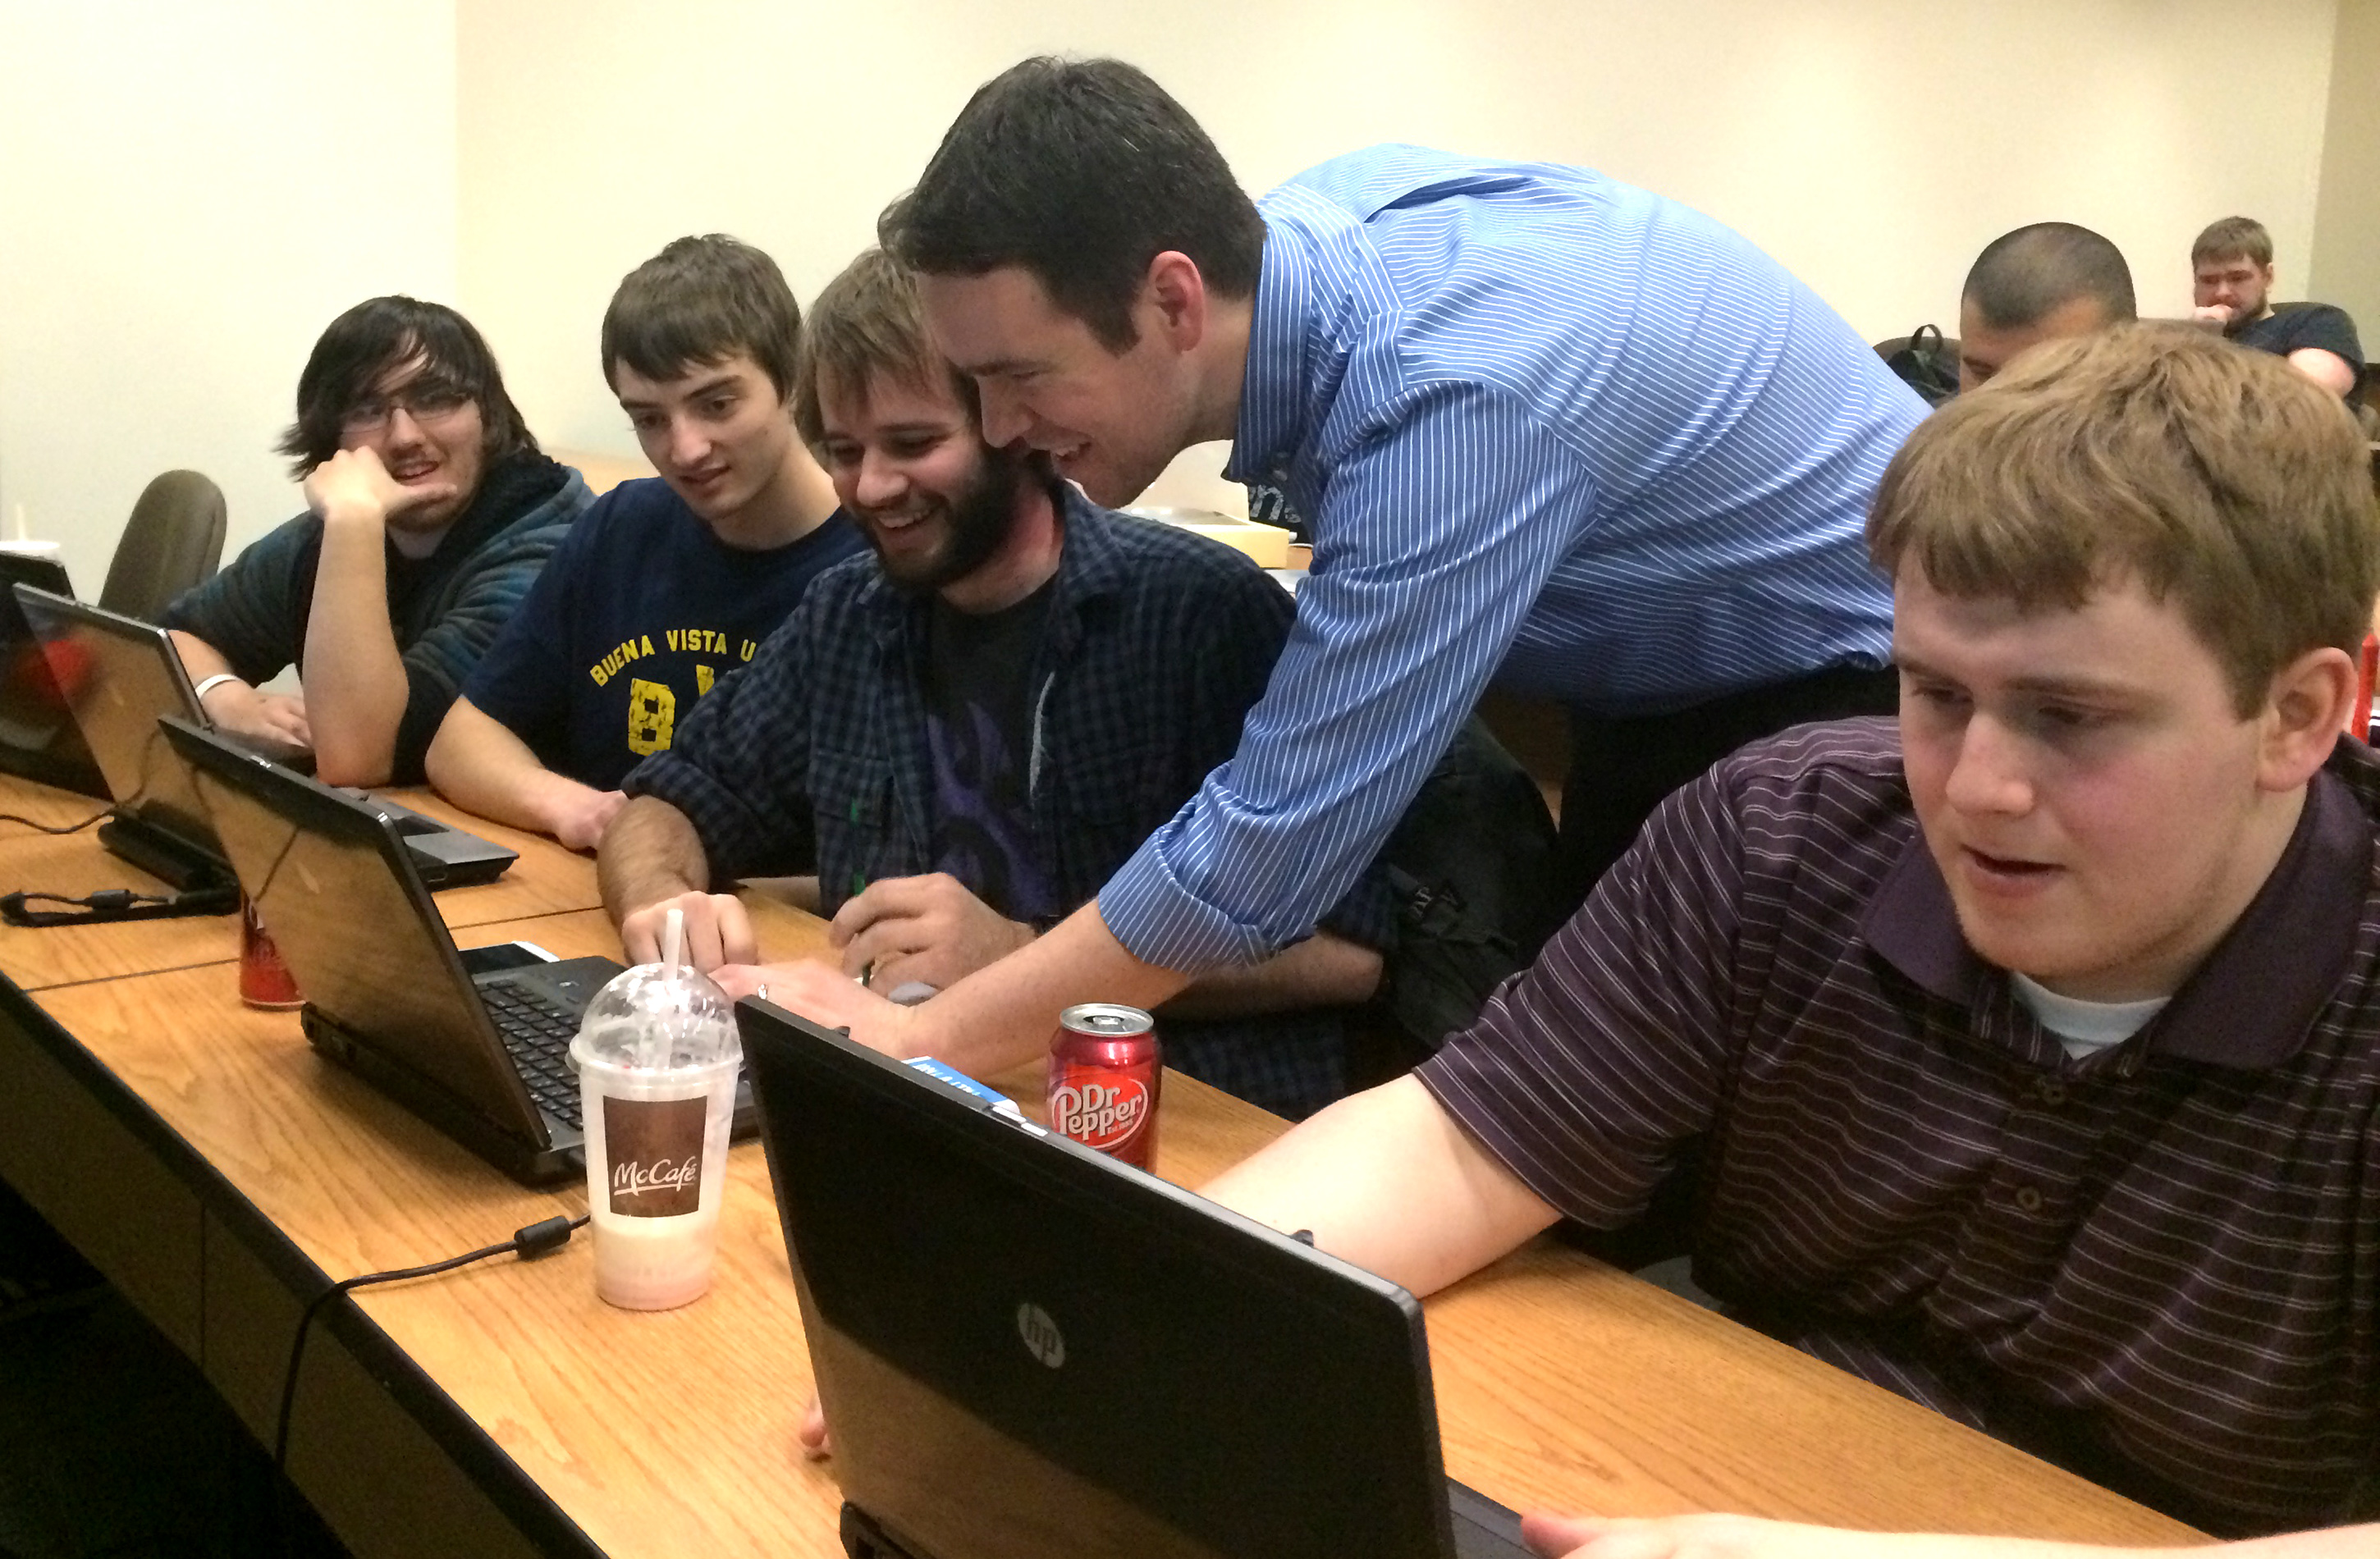 The winning BVU team in action, receiving input from Dr. Nathan Backman. From left to right: Alex Meier, Gerald Heylmun, Jonathan Kenkel, Dr. Nathan Backman and Arik Ostler